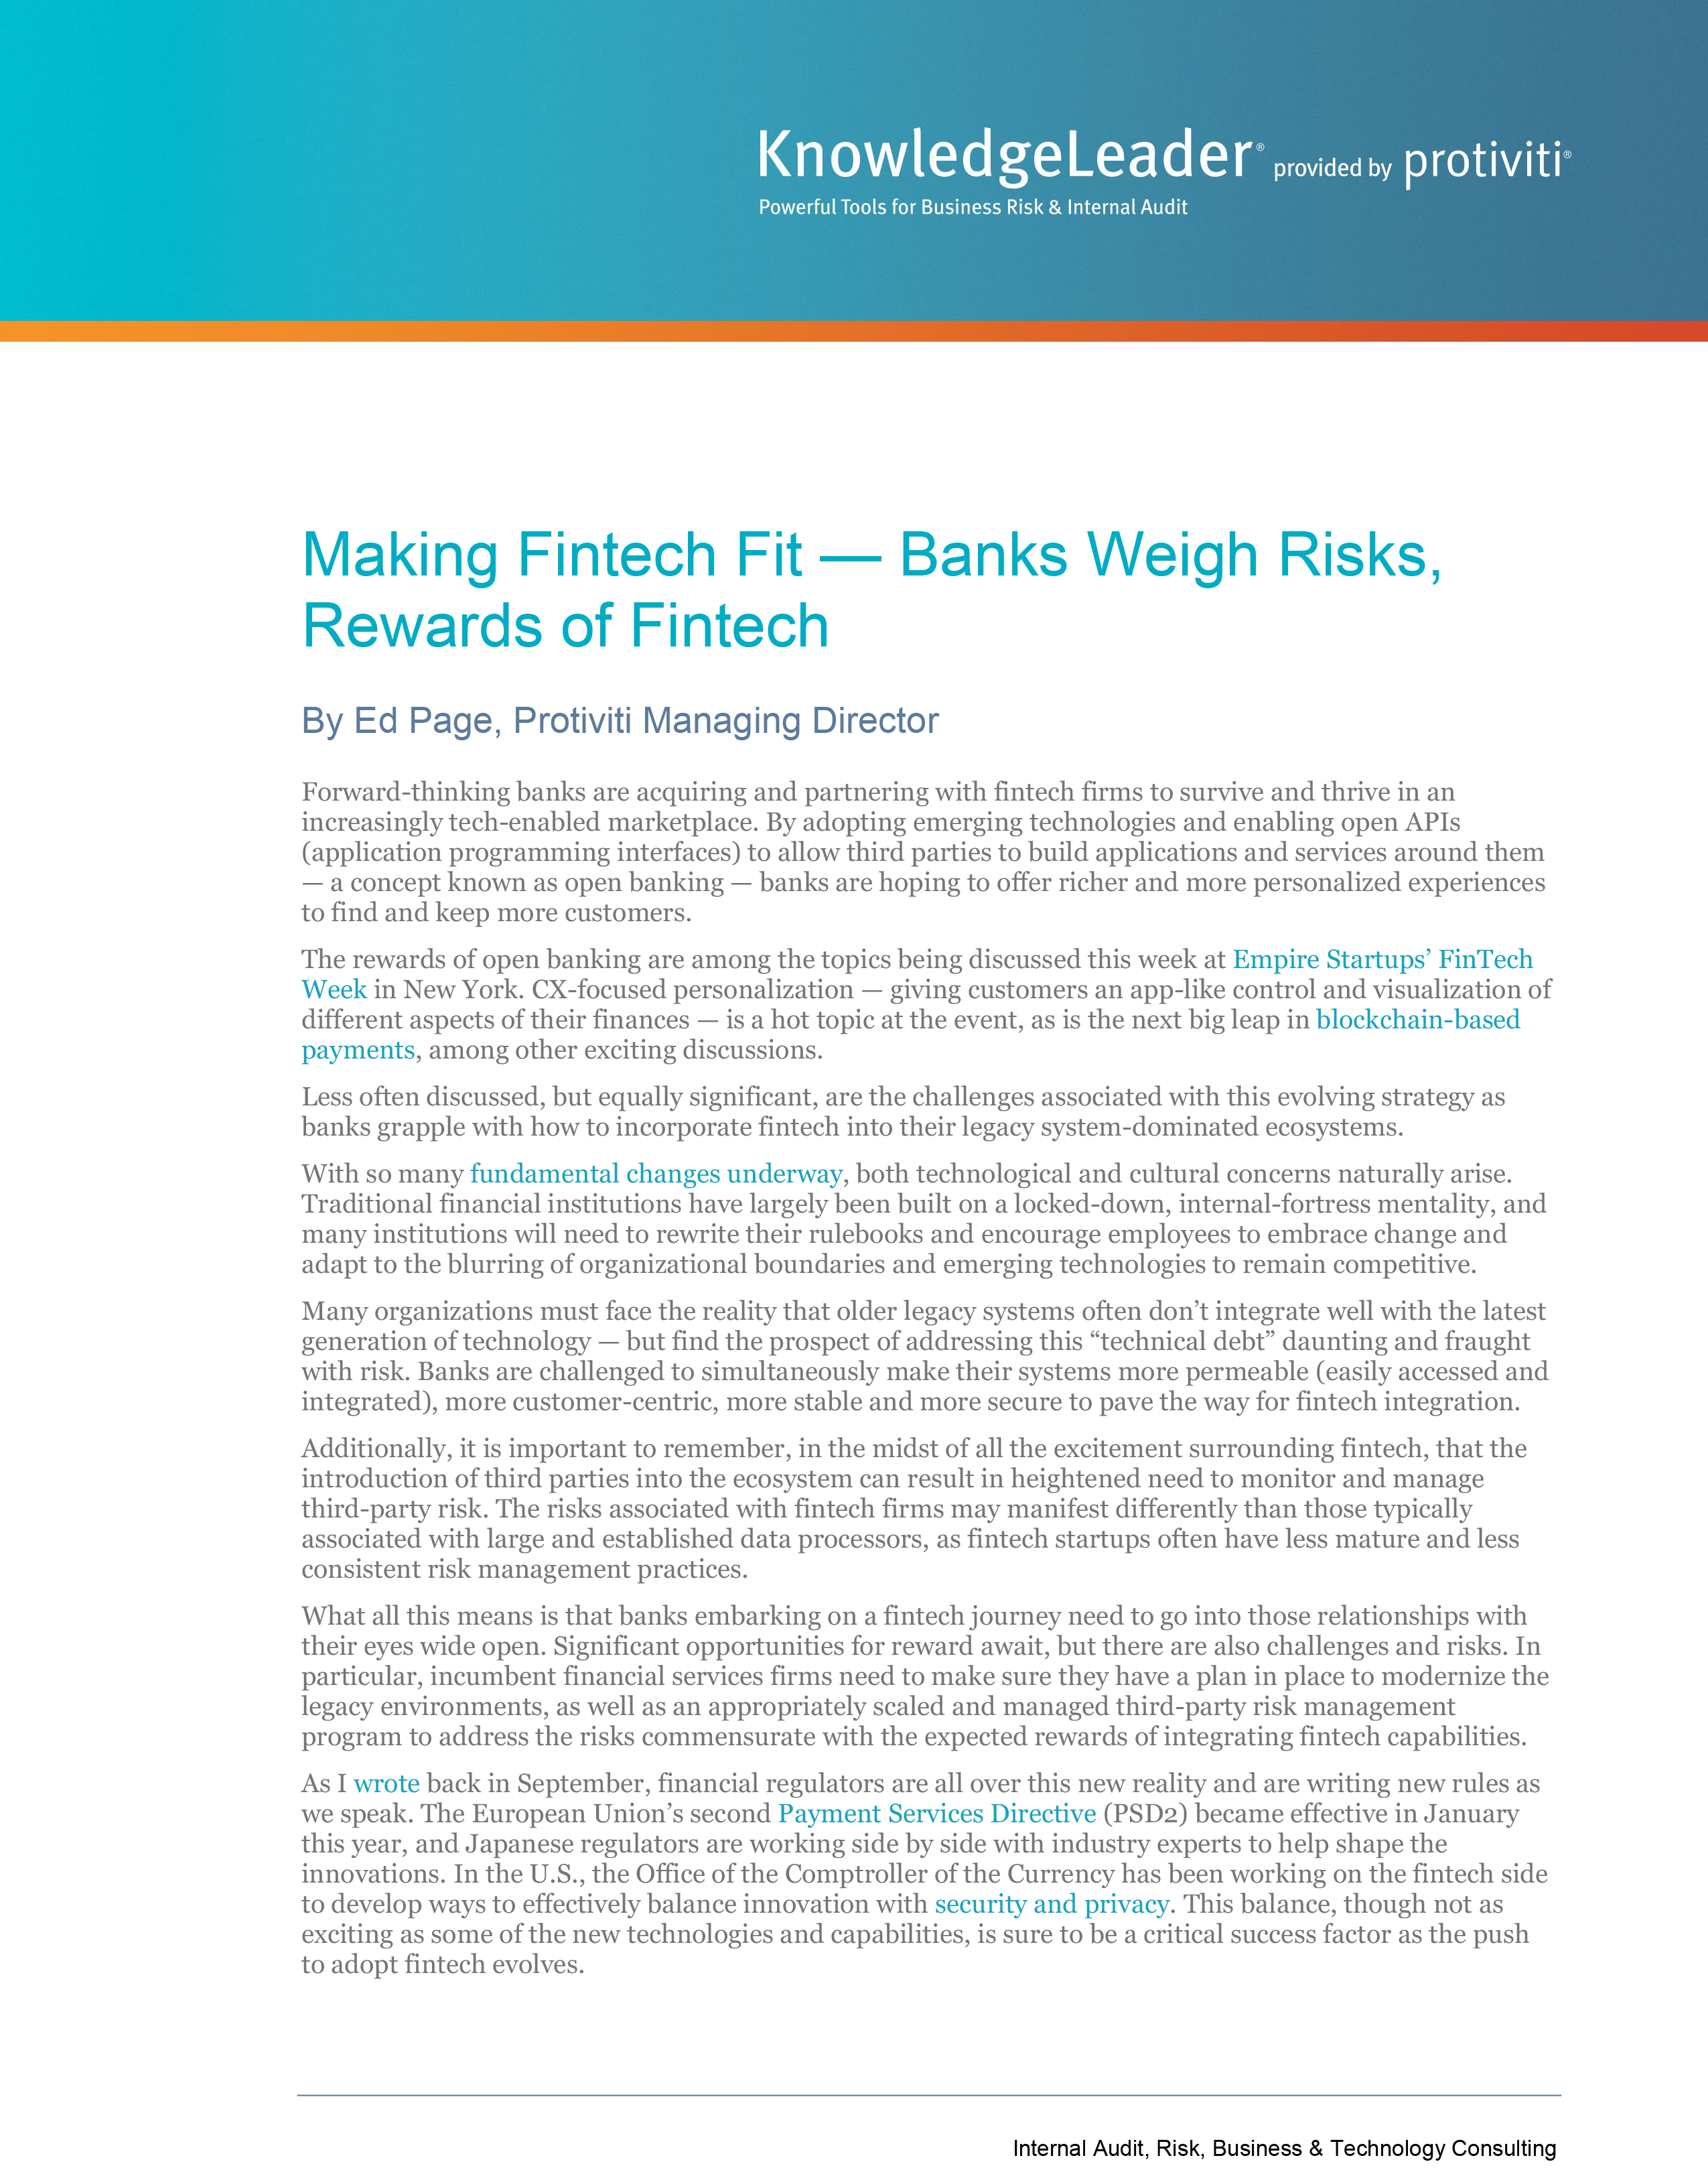 Screenshot of the first page of Making Fintech Fit — Banks Weigh Risks,Rewards of Fintech